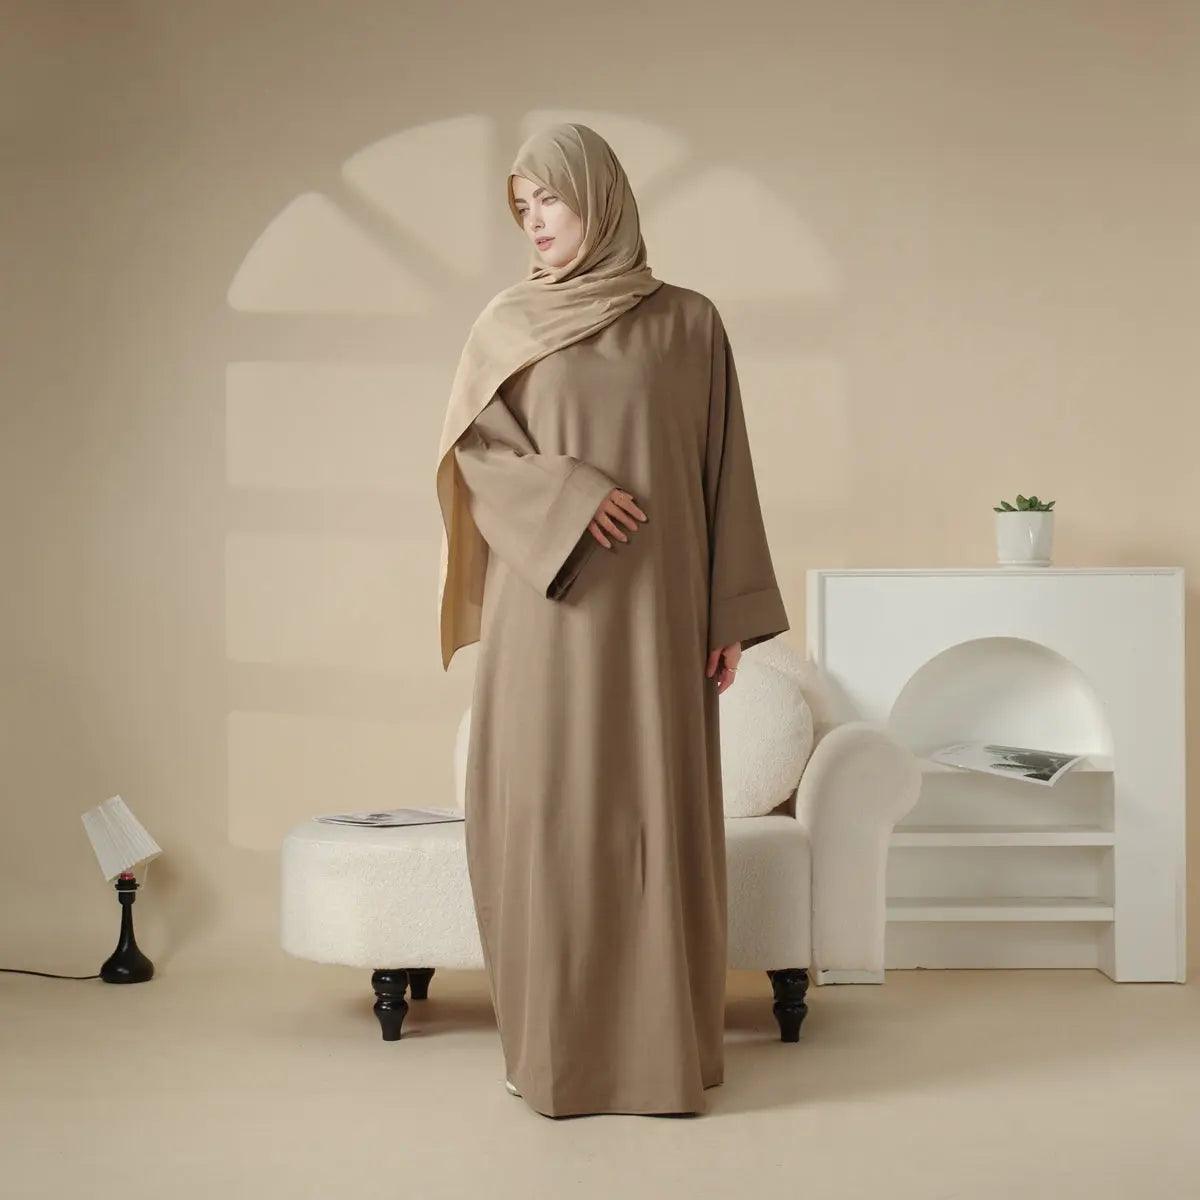 MA043 Linen Plain Abaya with Pockets 2-Piece Set - Mariam's Collection